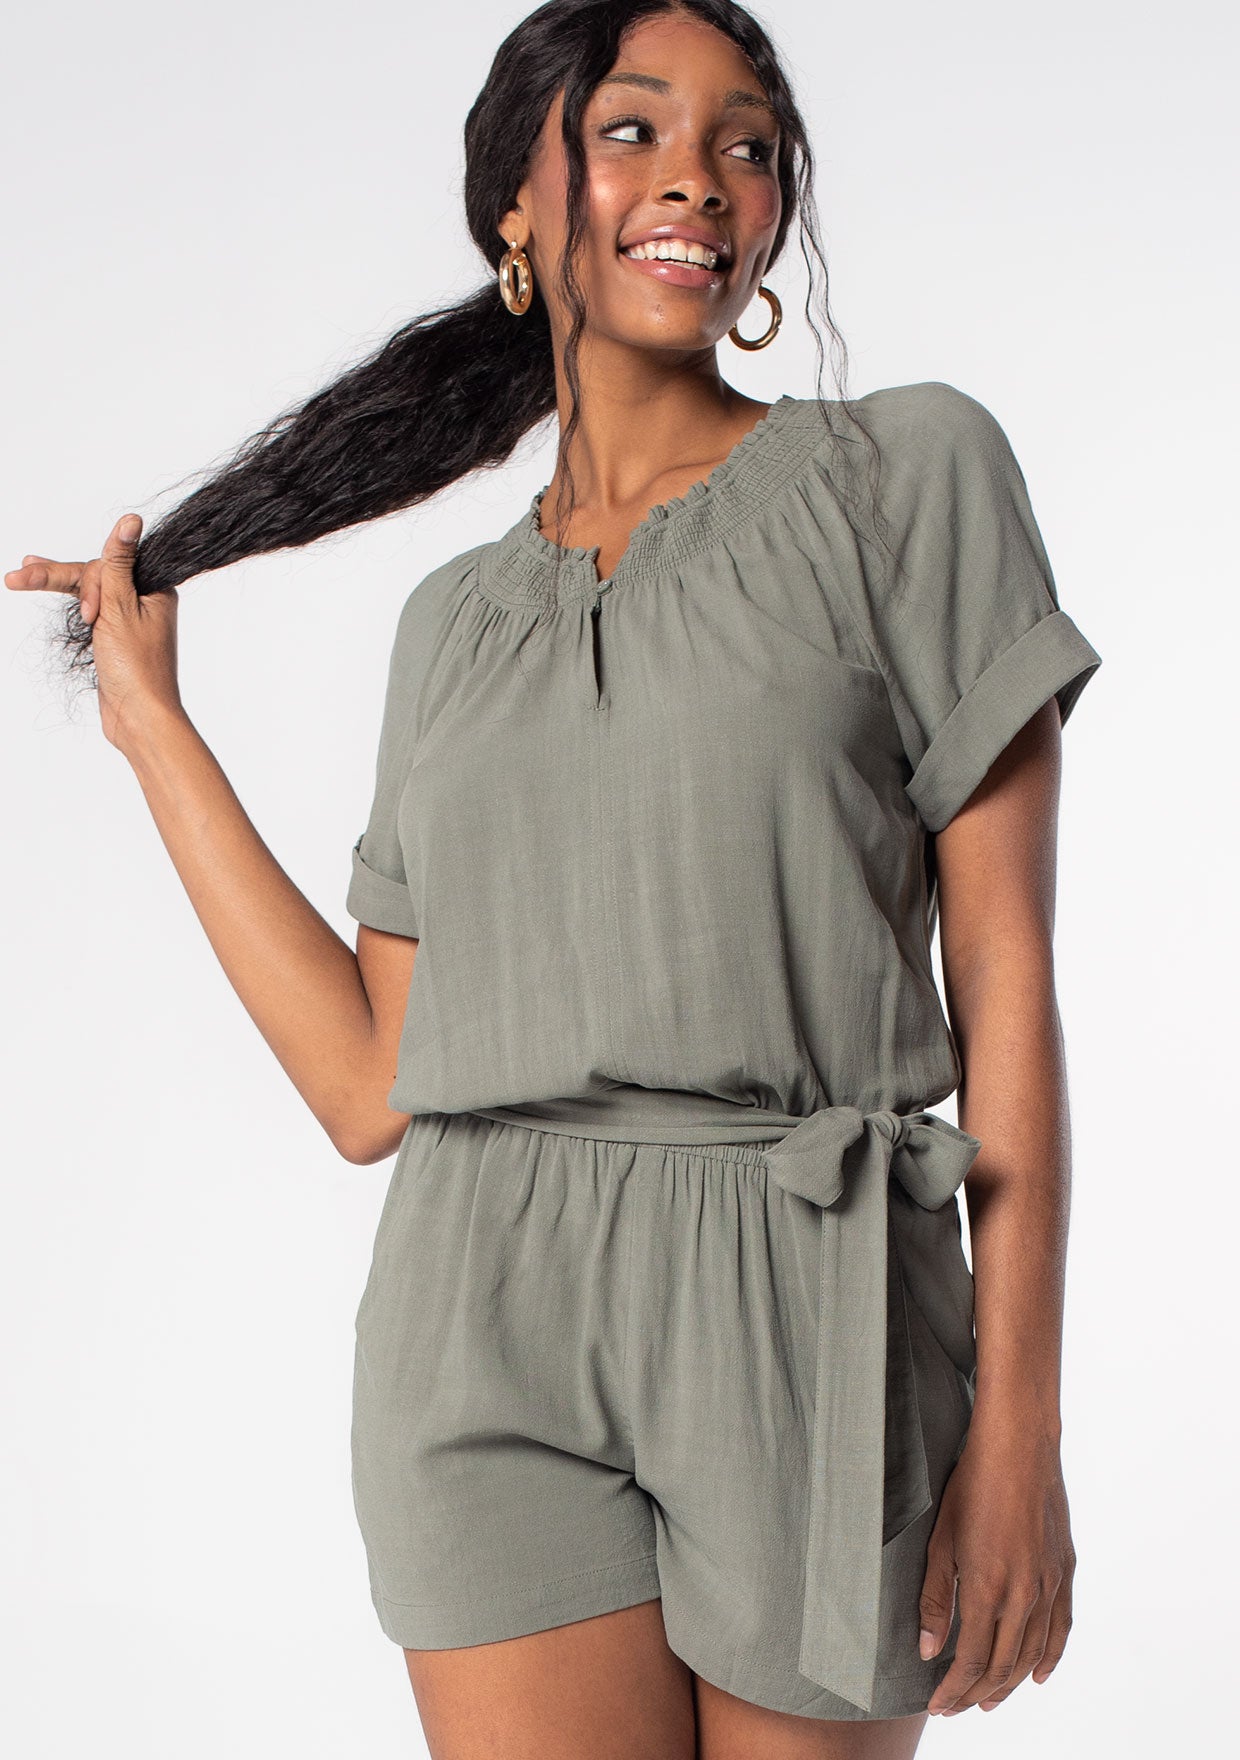 Women's Short Sleeve Jumpsuits & Rompers